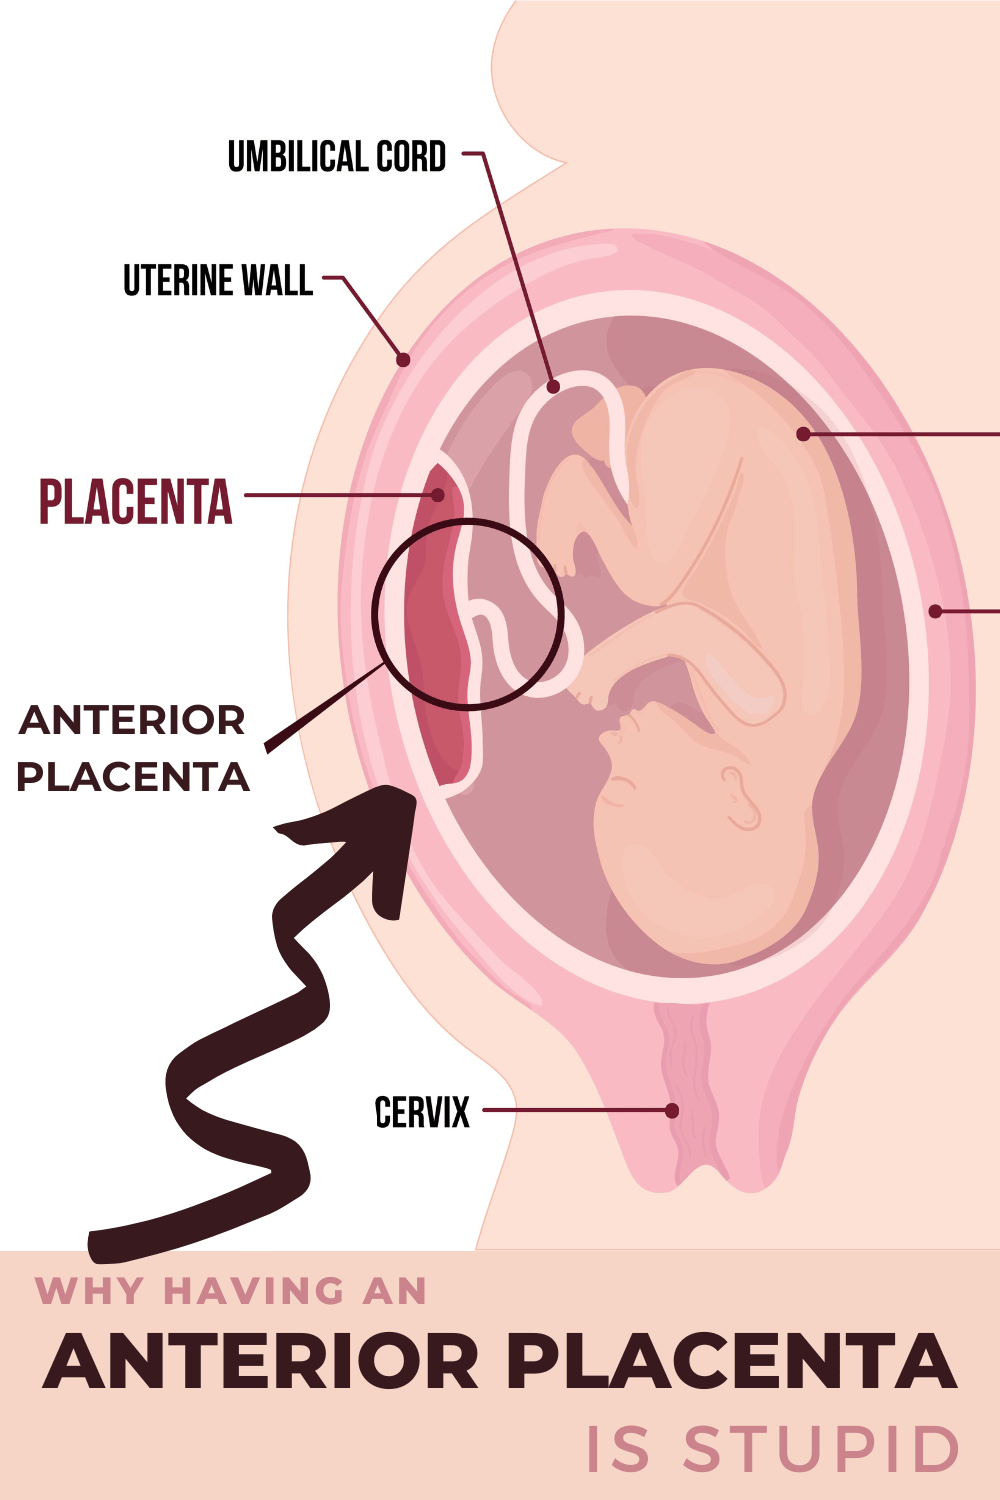 Diagram showing the location of an anterior placenta in the uterus during a pregnancy.